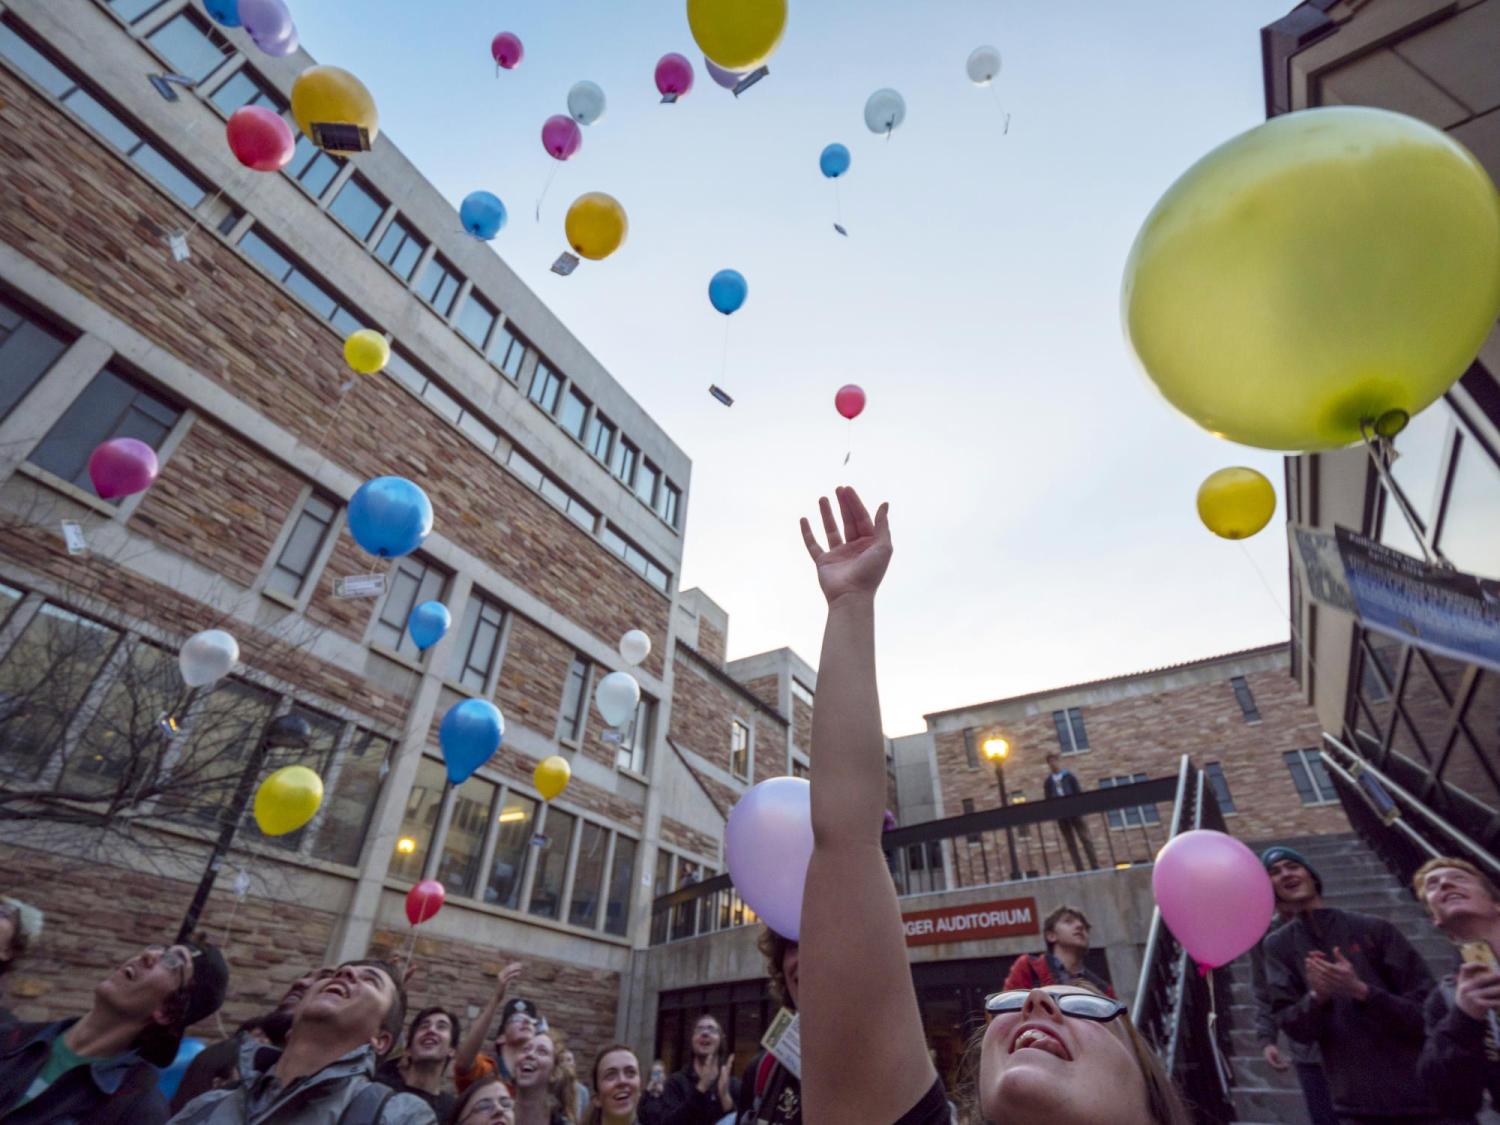 Students release biodegradable balloons as part of class project